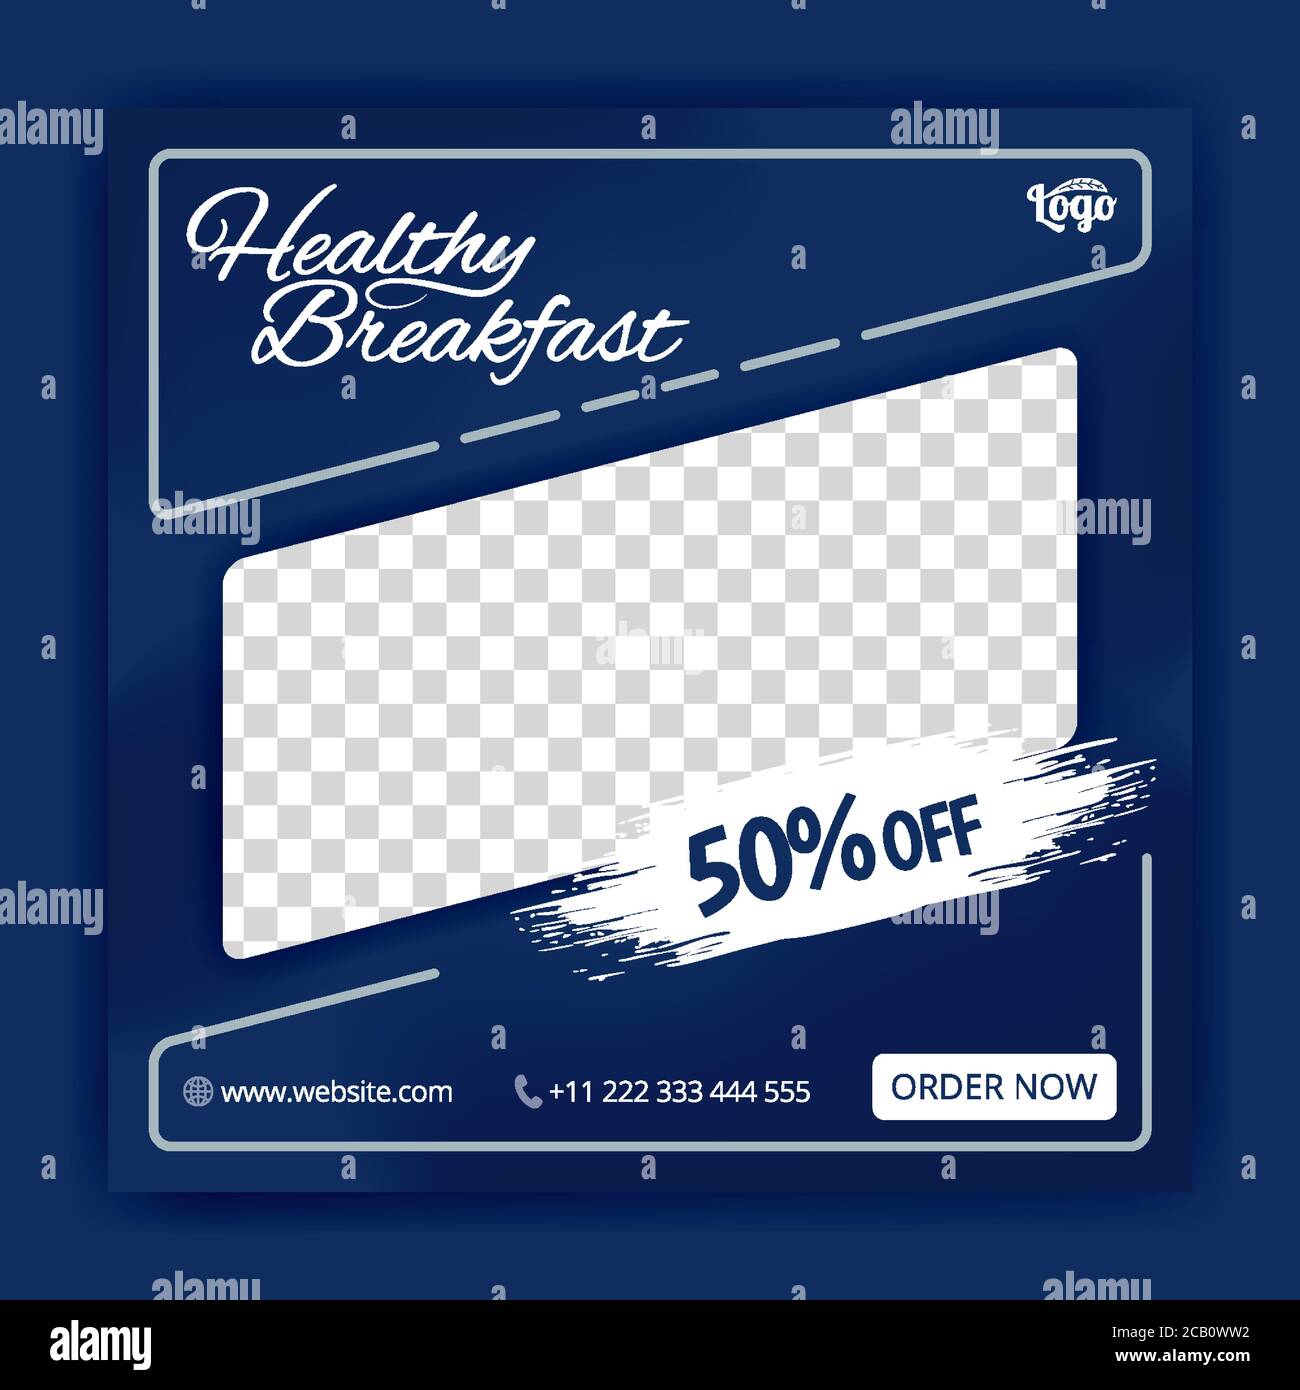 Healthy breakfast for social media post templates. Food and beverage posters. Can be used for online media, brochure, flyer, wall advertisement, poste Stock Vector